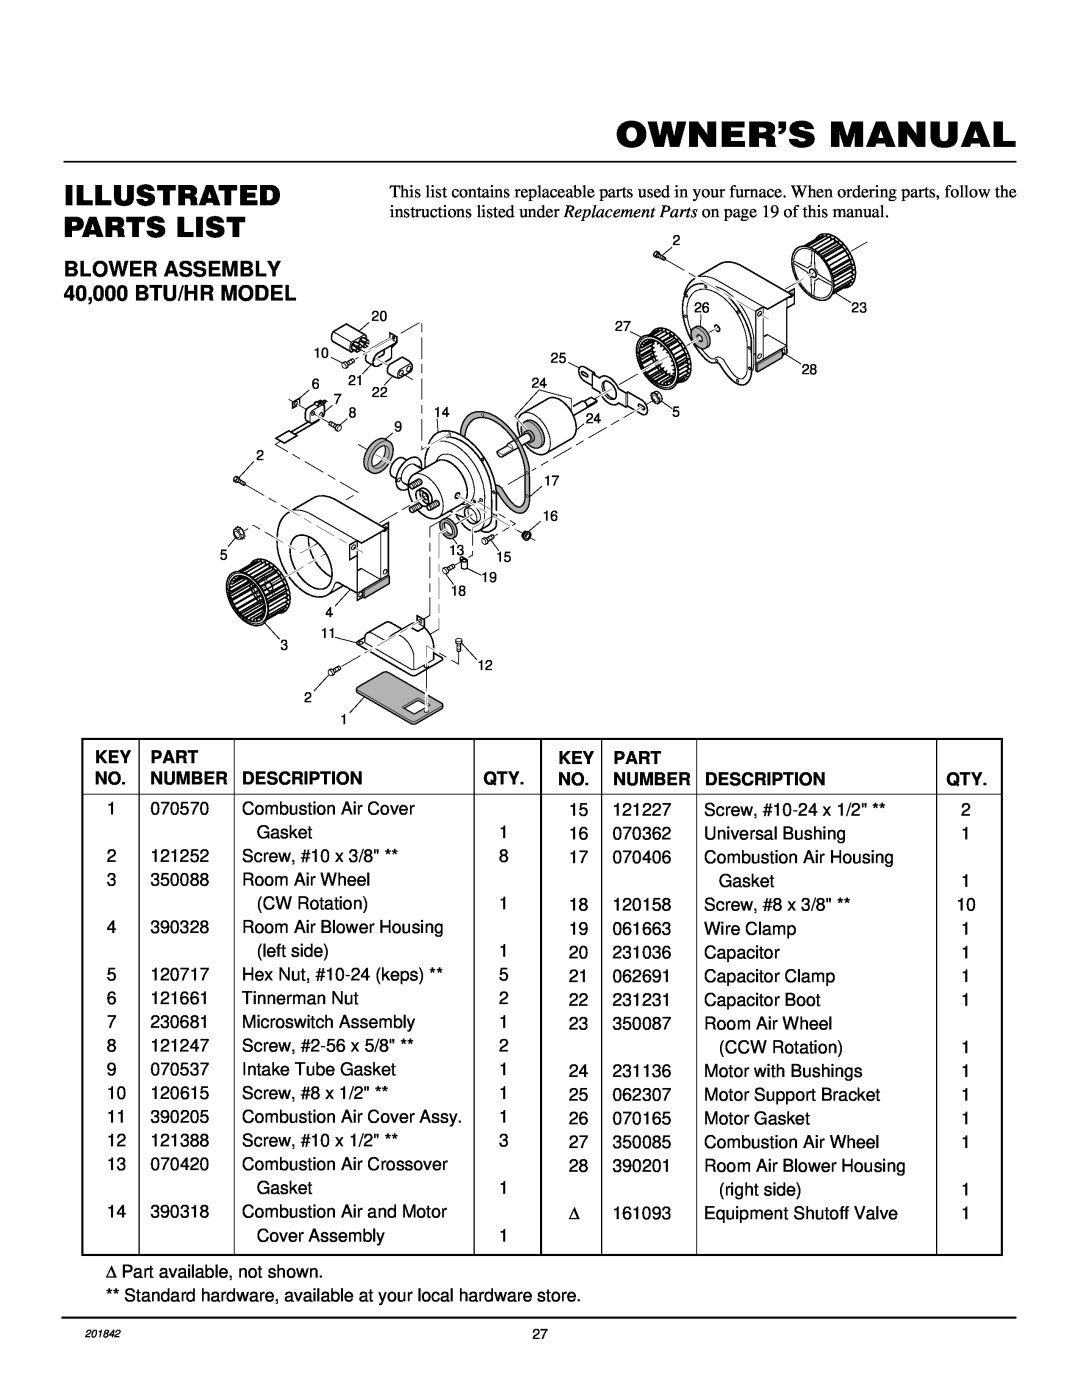 Williams 4003532, 2503532 installation manual Owner’S Manual, Illustrated Parts List, BLOWER ASSEMBLY 40,000 BTU/HR MODEL 